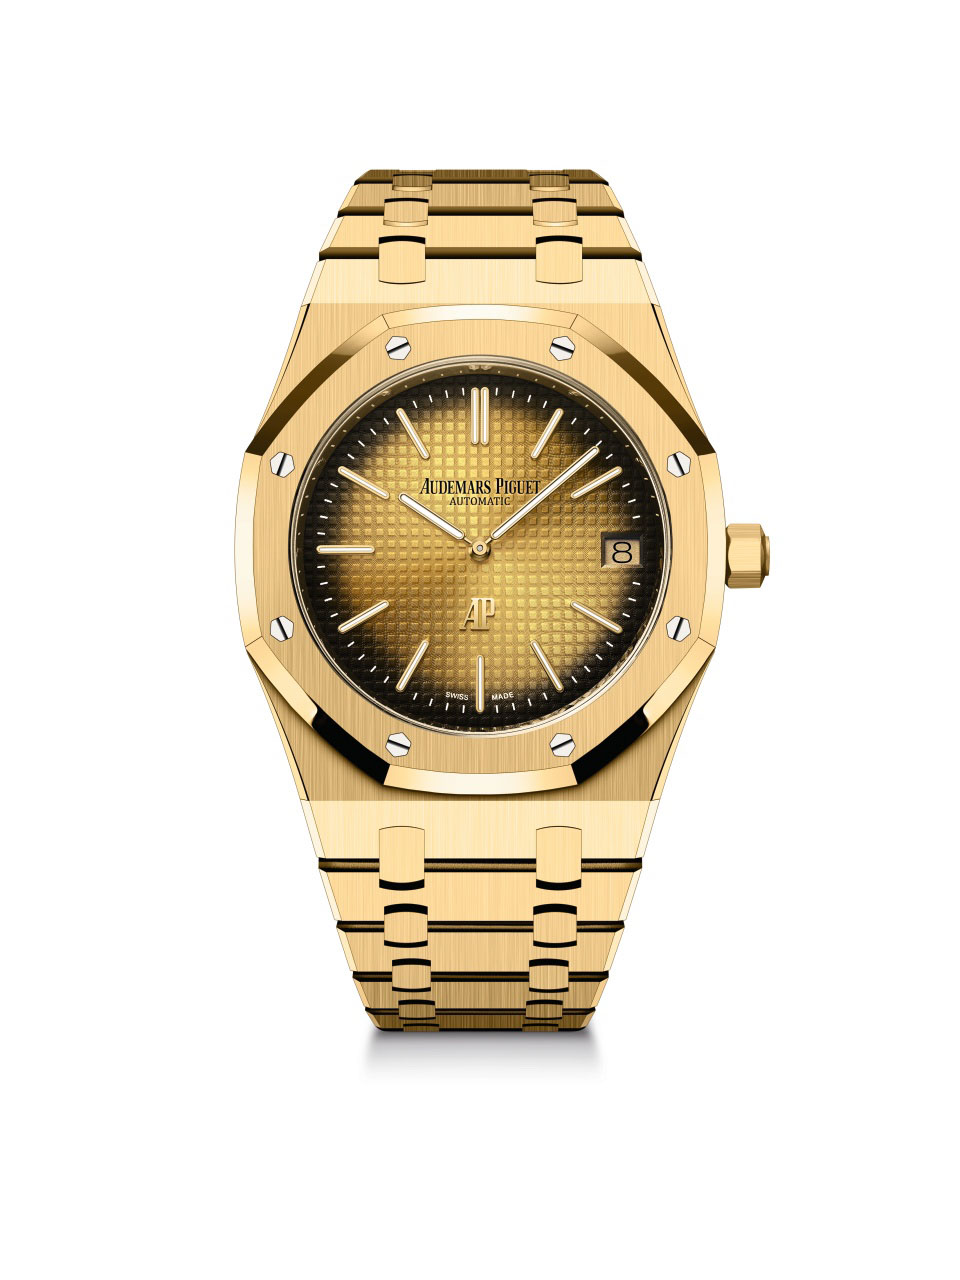 Royal Oak “Jumbo” Extra-Thin / 39mm; Ref. 16202BA.OO.1240BA.01 in 18-carat yellow gold with smoked yellow-gold-toned dial